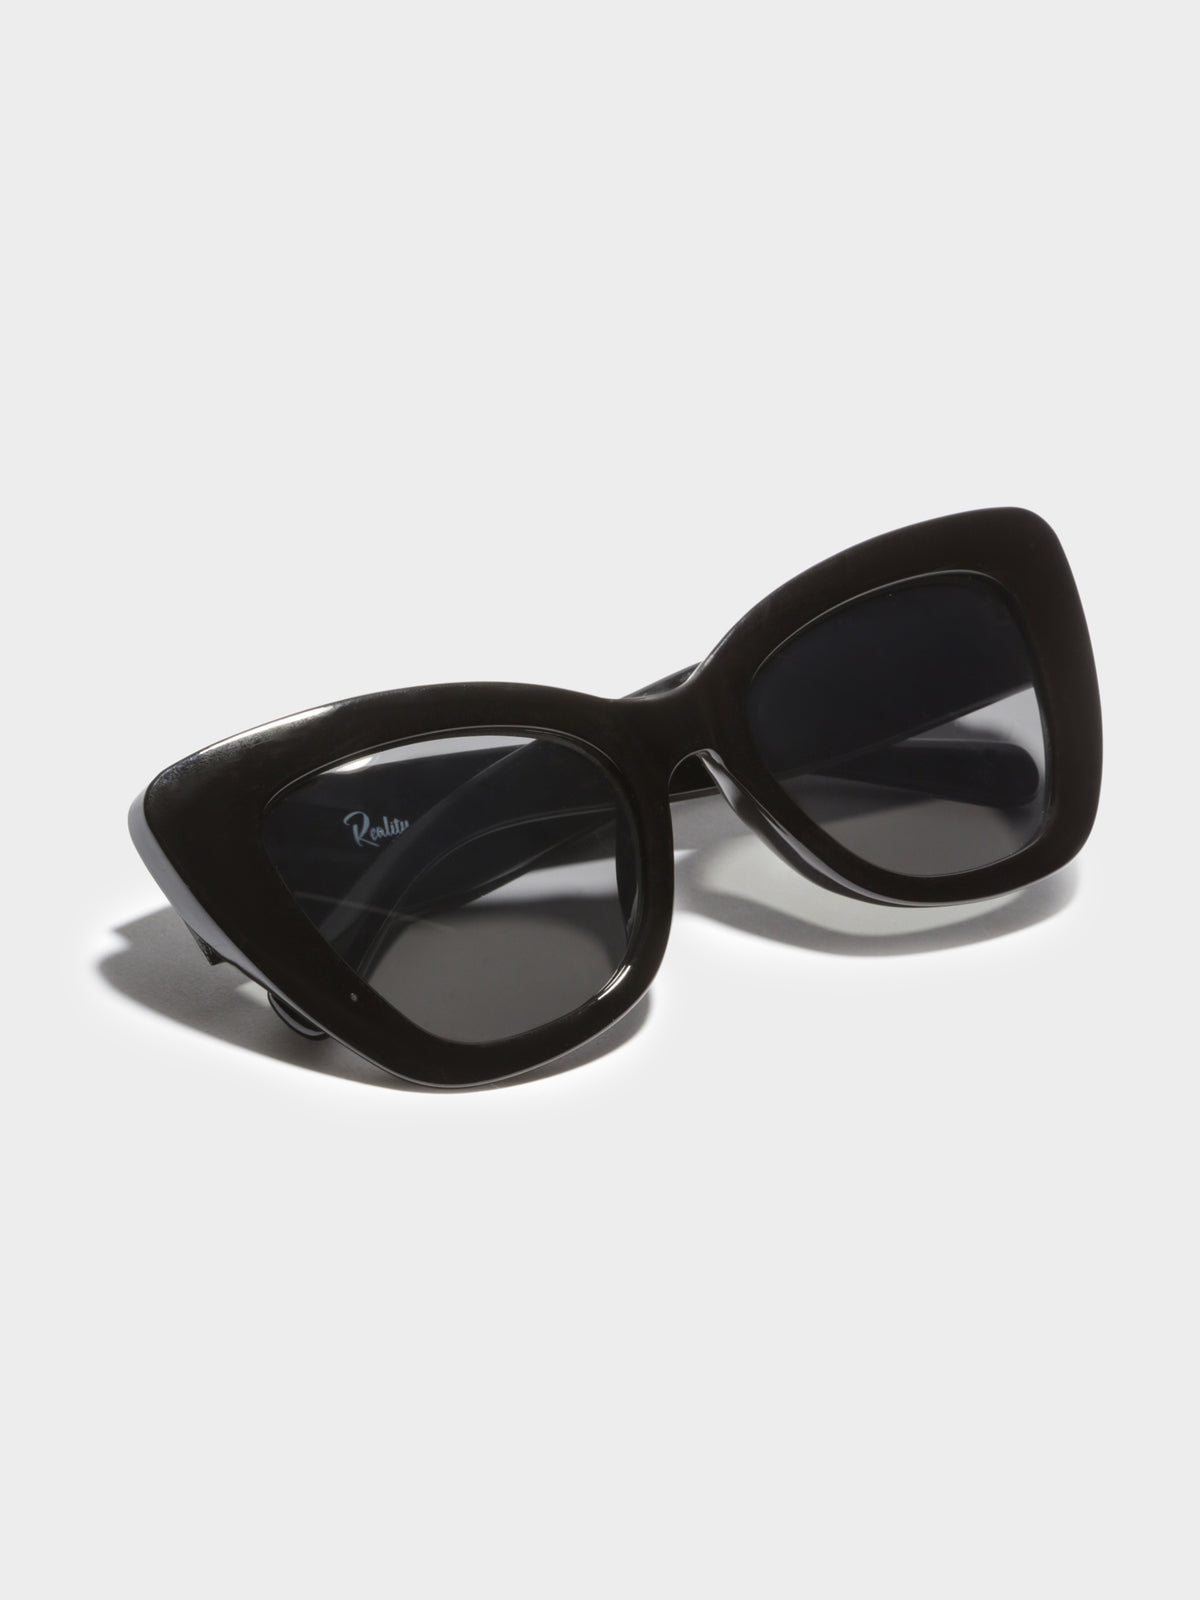 Mulholland Butterfly Sunglasses in Black